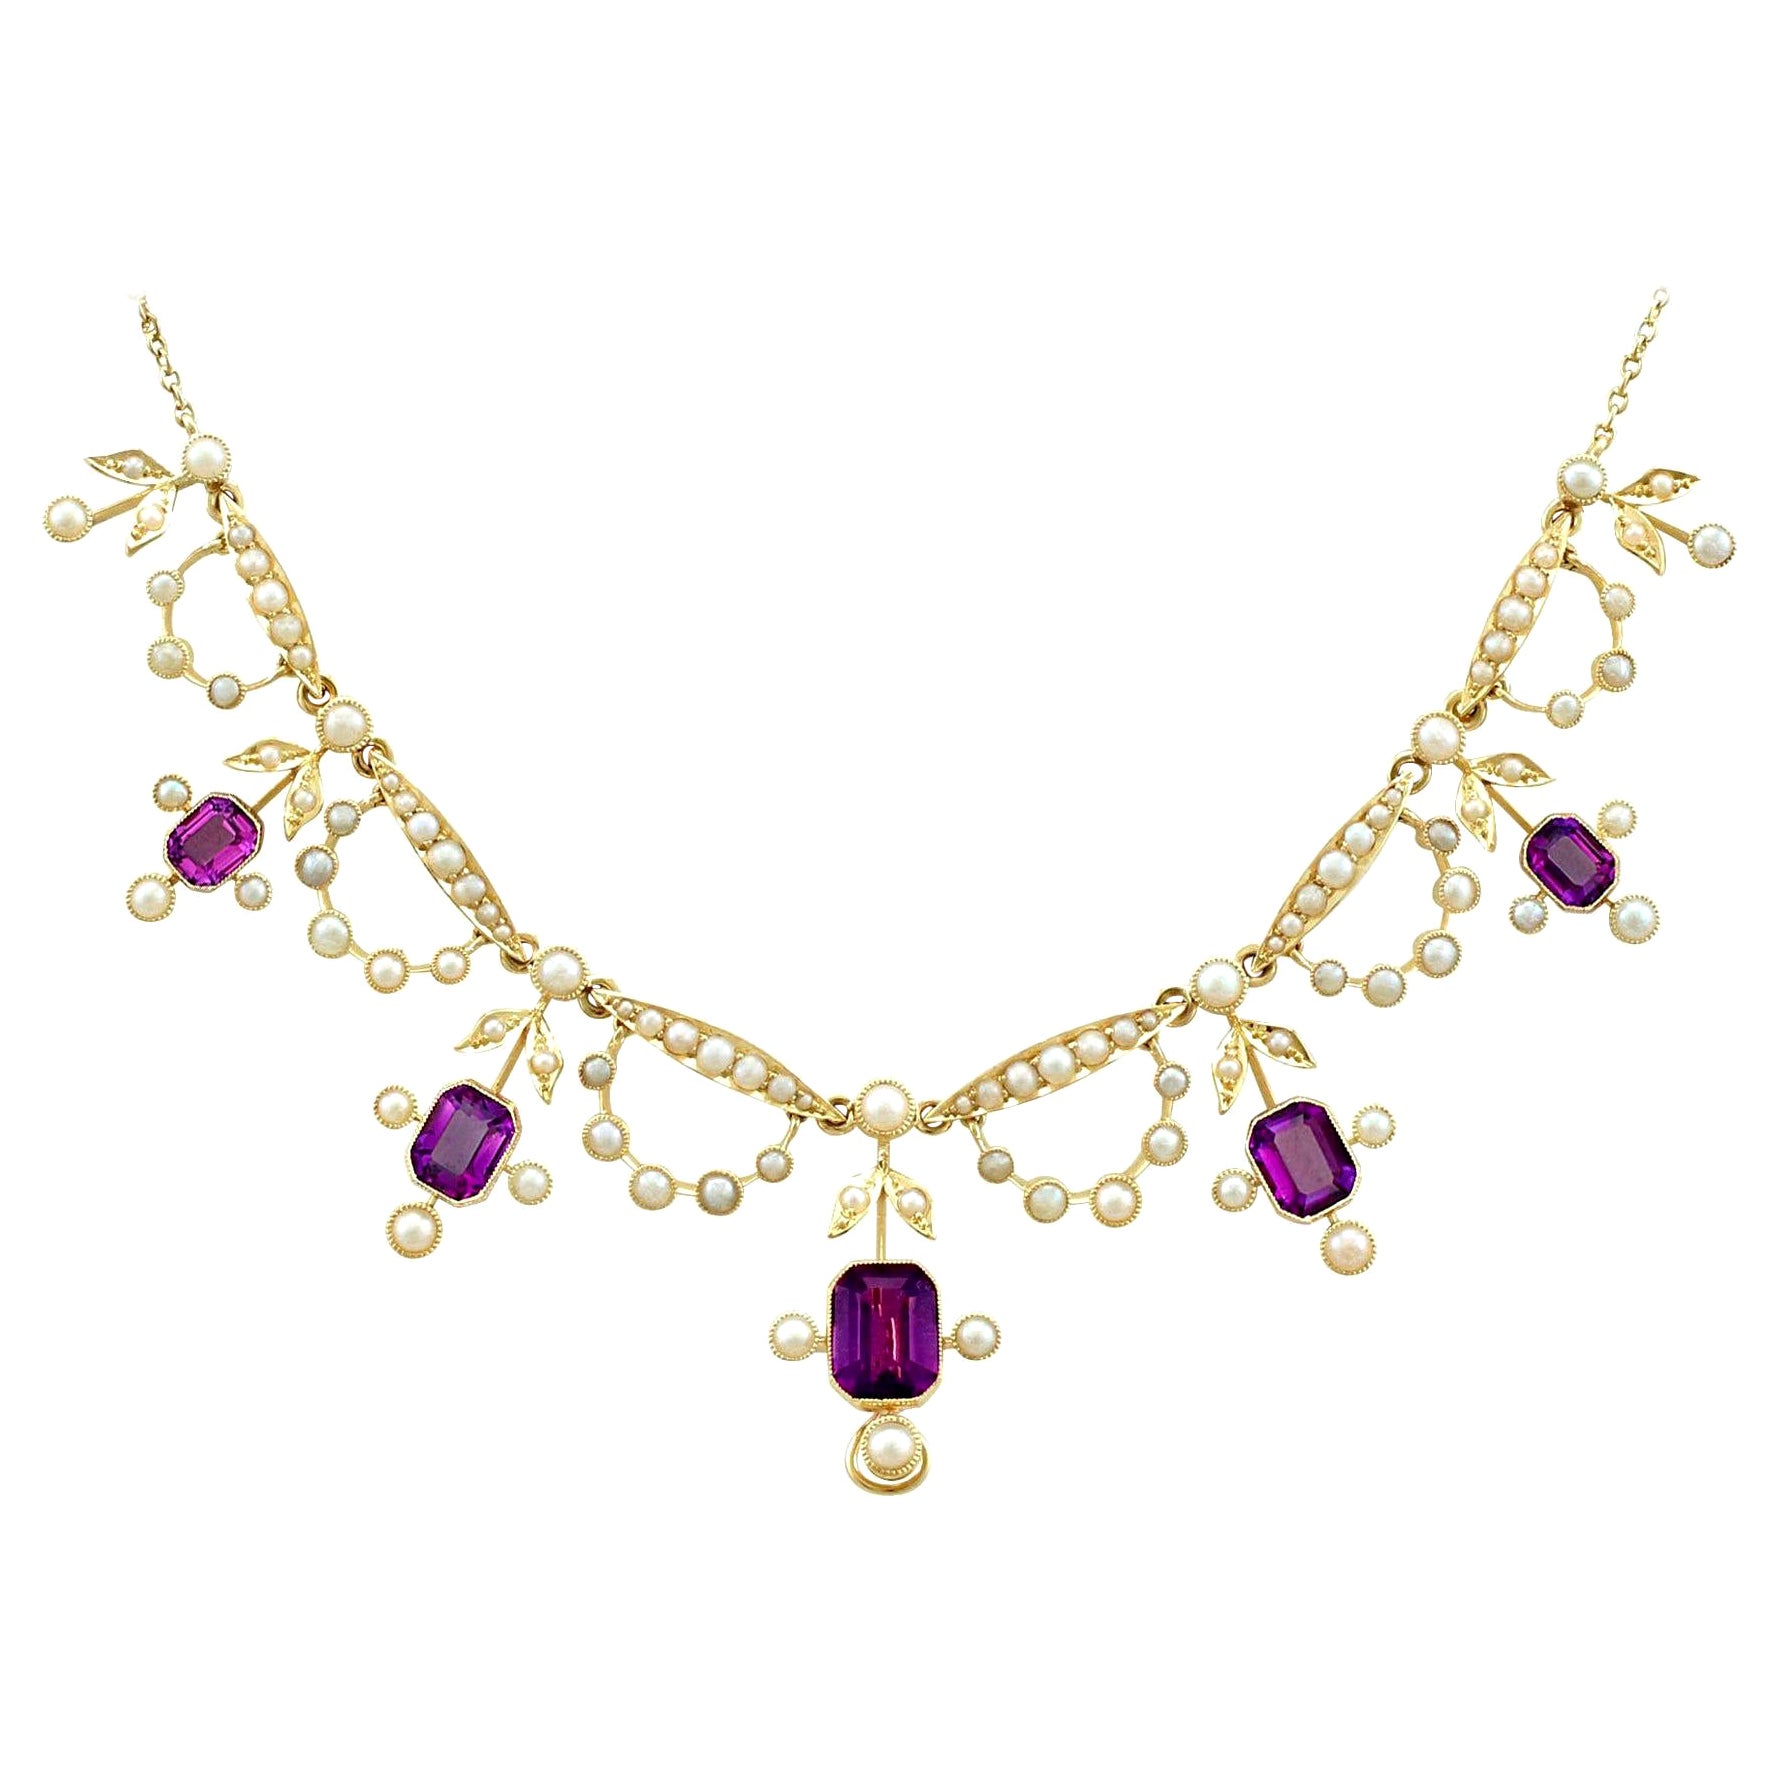 Antique Edwardian 4.47 Carat Amethyst and Seed Pearl Yellow Gold Necklace